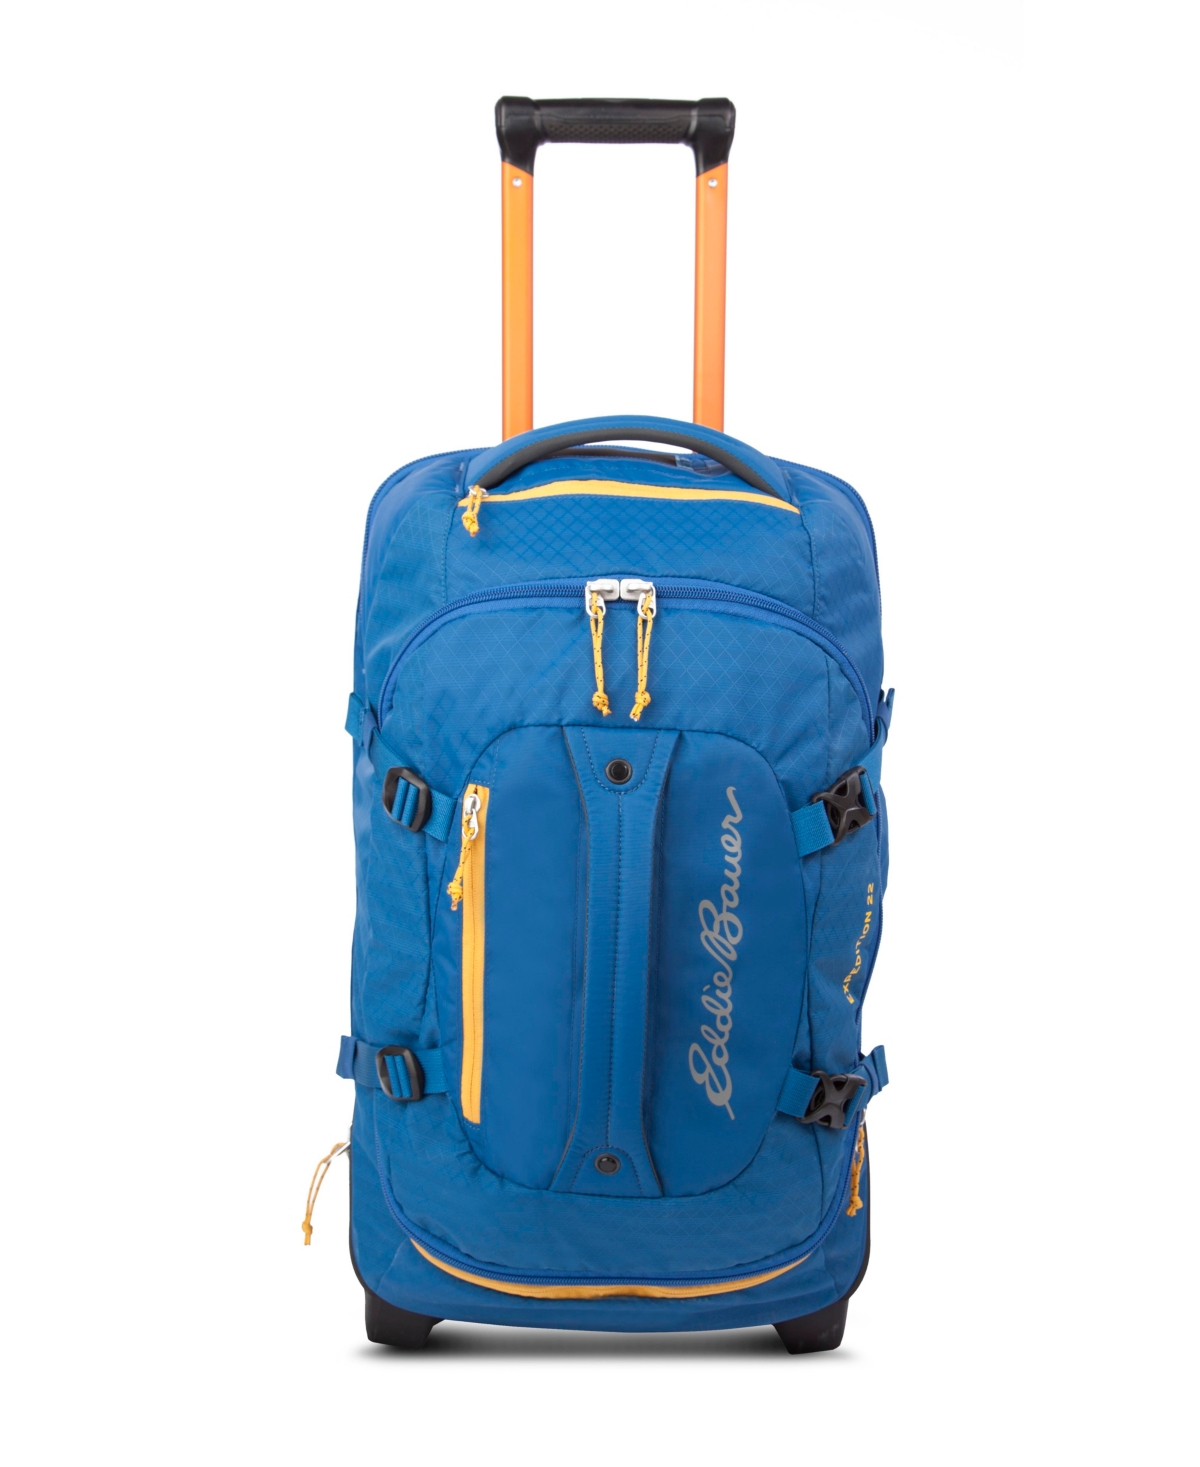 Expedition 22 Duffel 2.0 - Rust